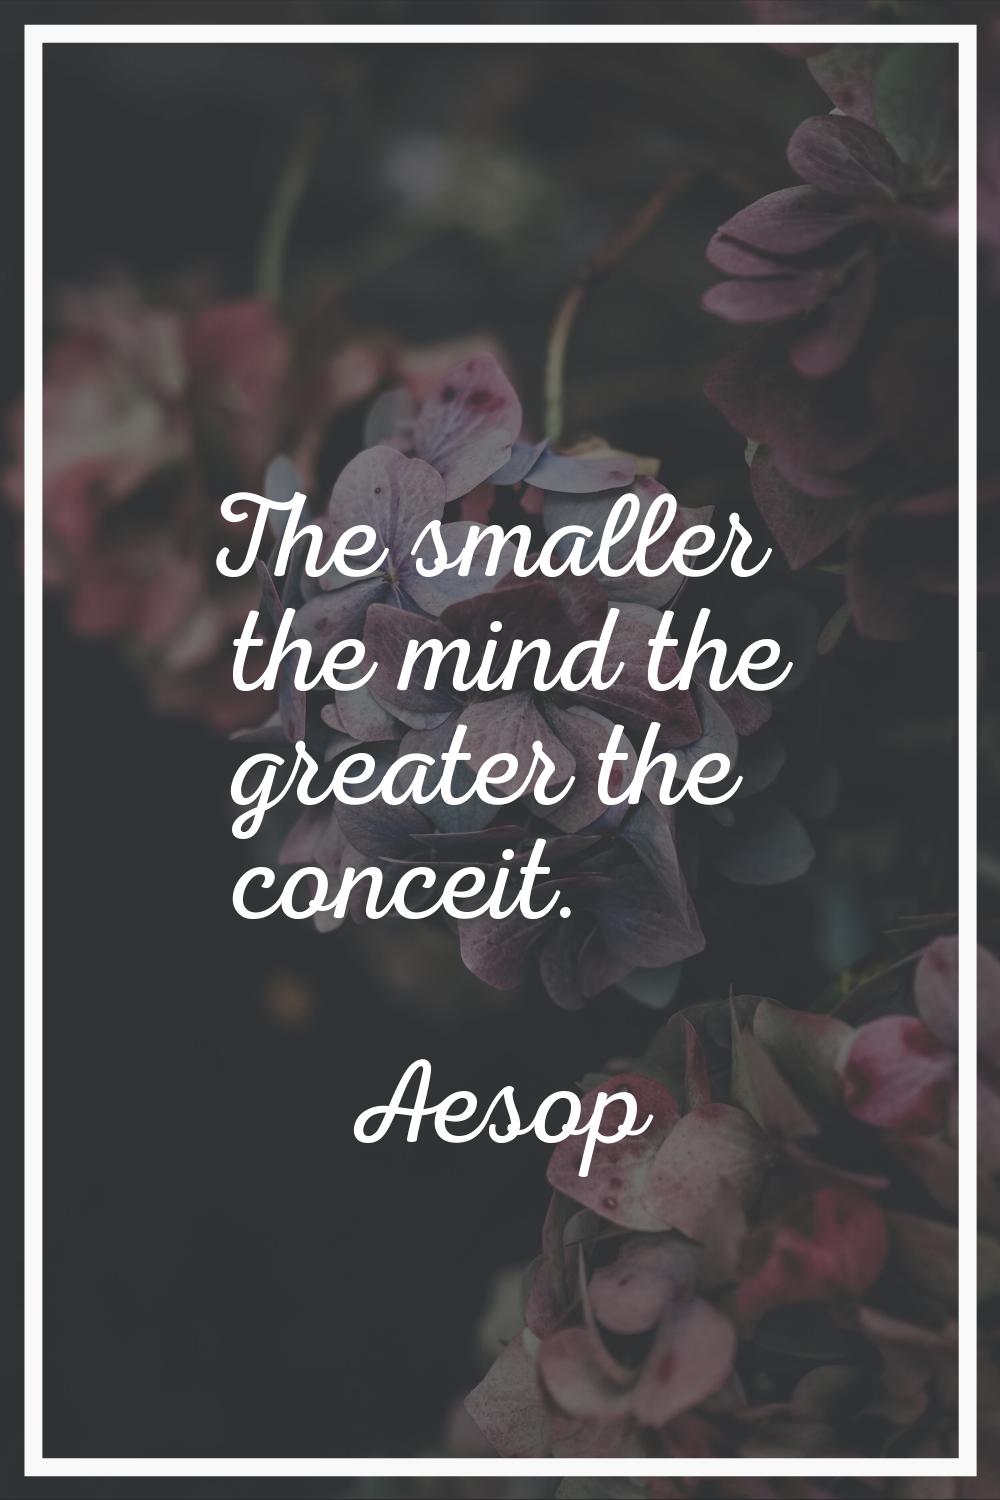 The smaller the mind the greater the conceit.